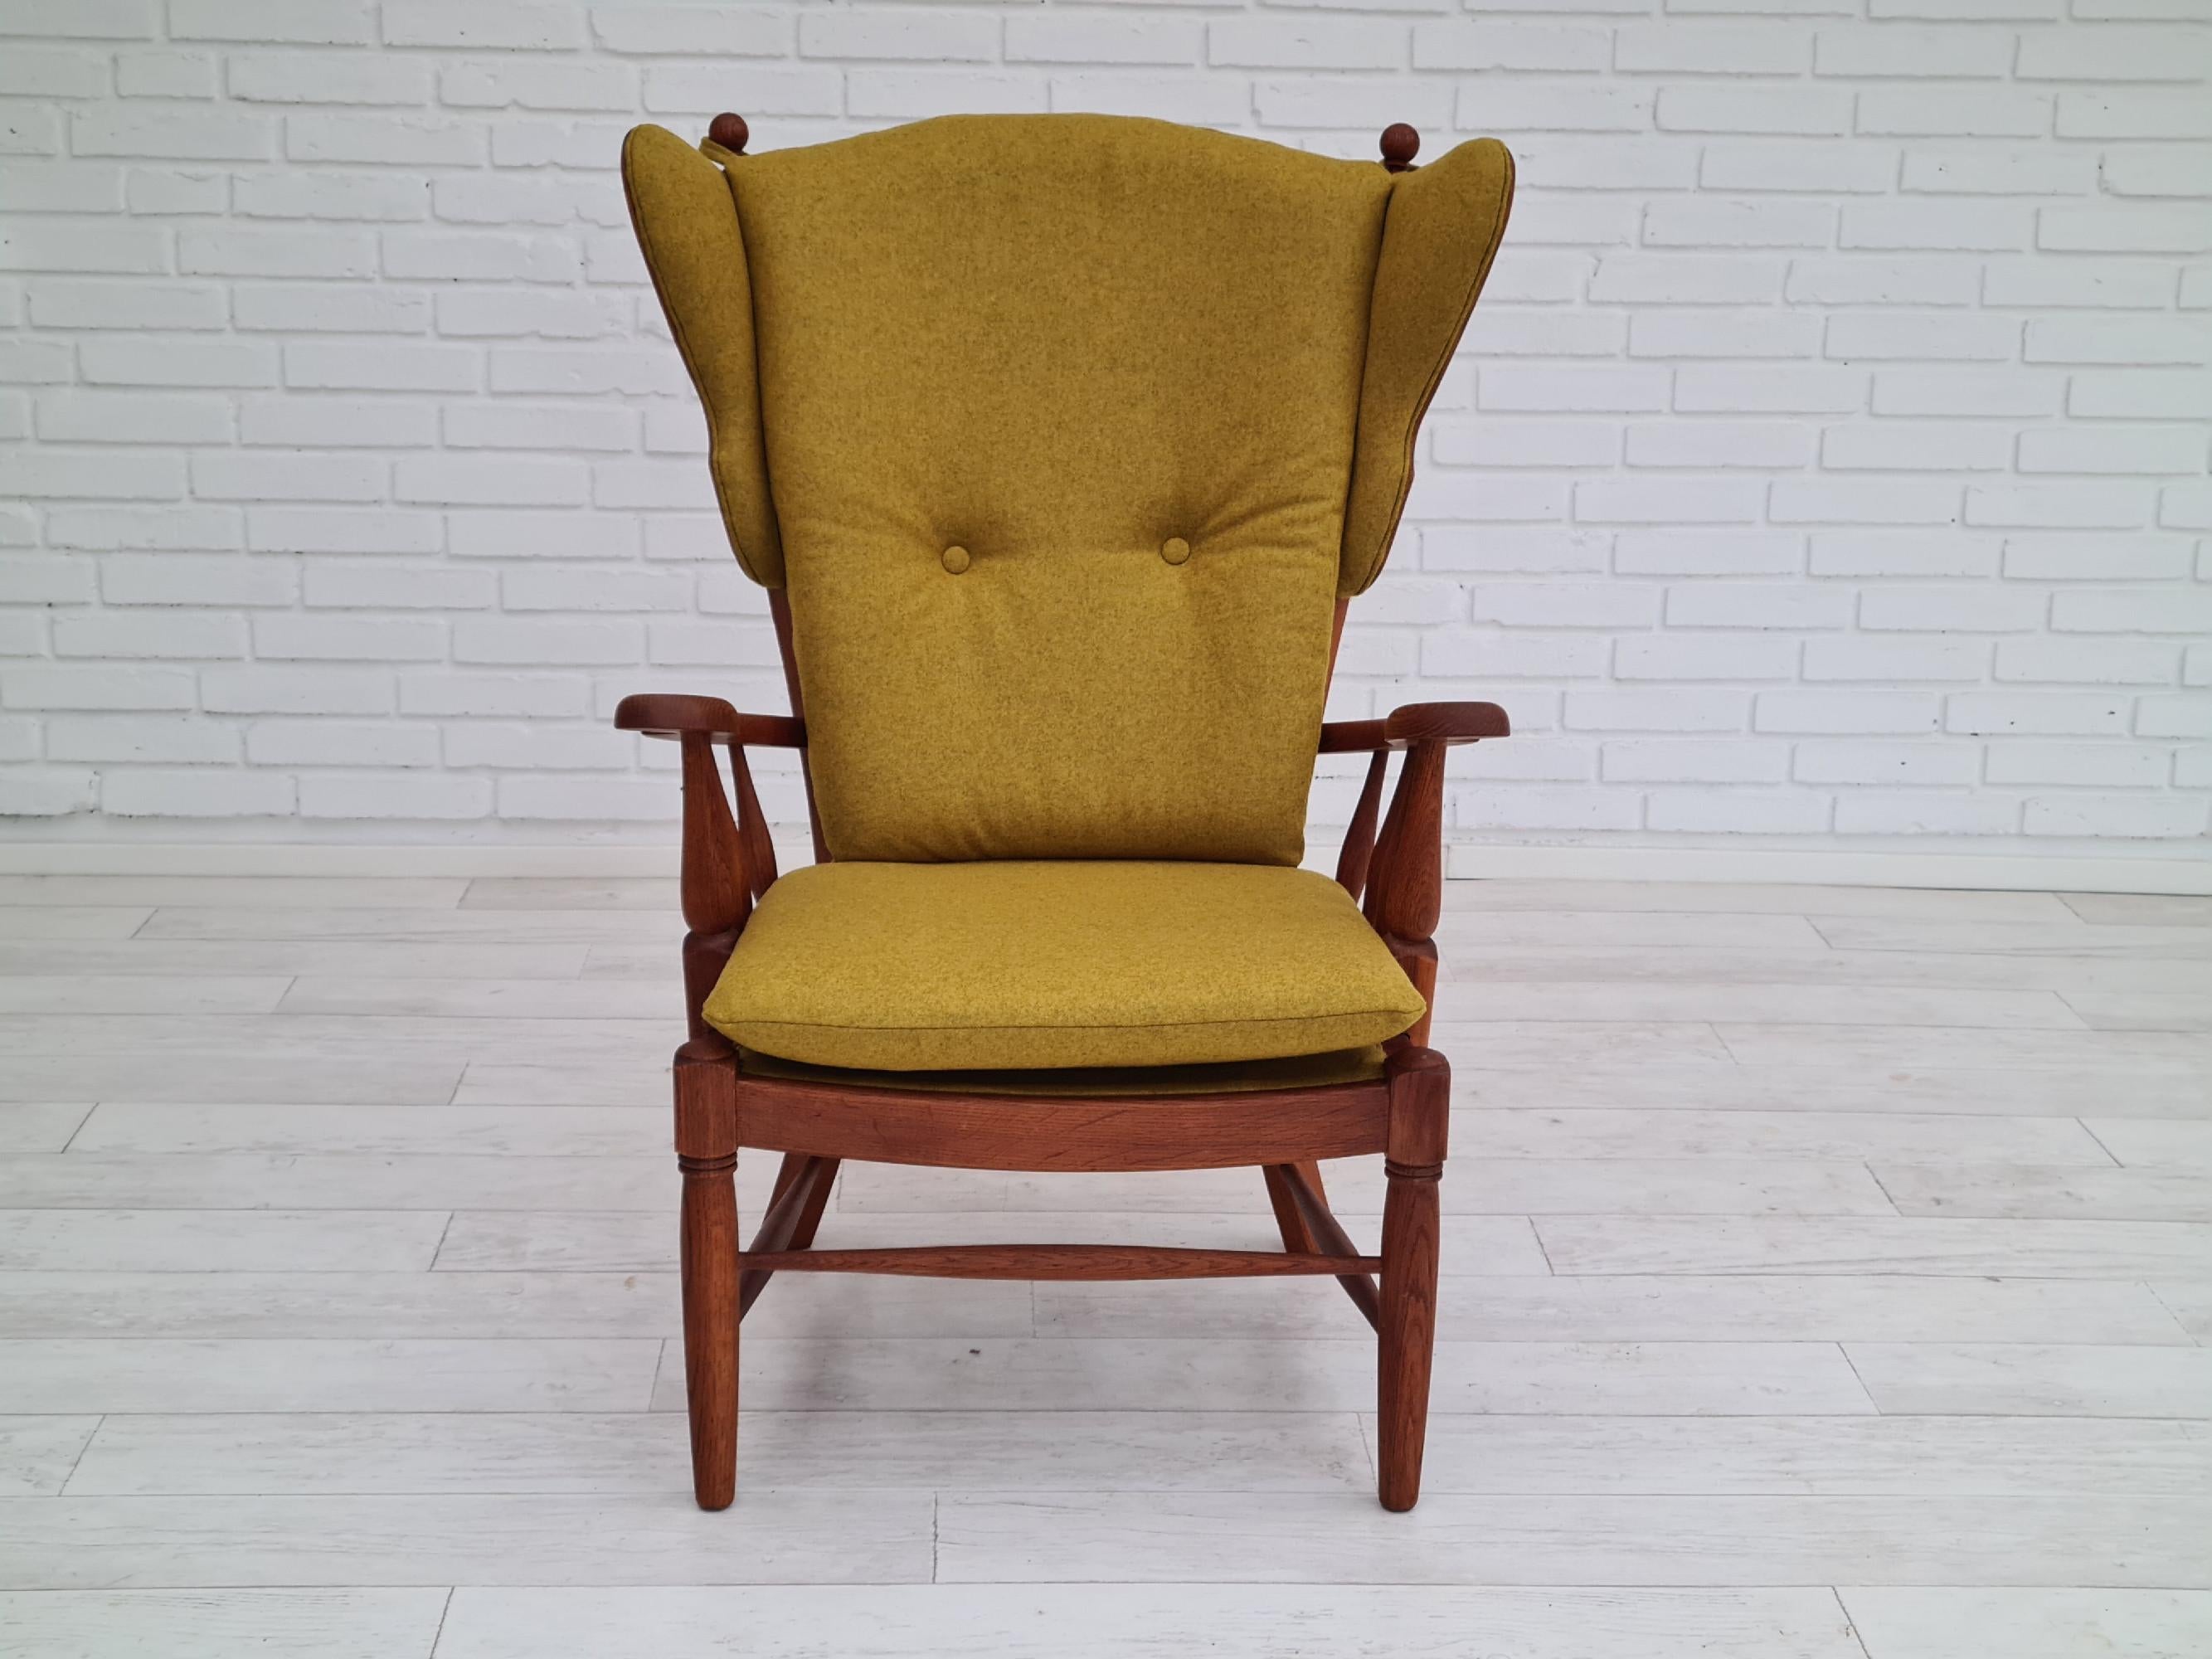 60s, reupholstered Danish high-backed ear flap chair, solid oak, furniture wool In Excellent Condition In Tarm, 82